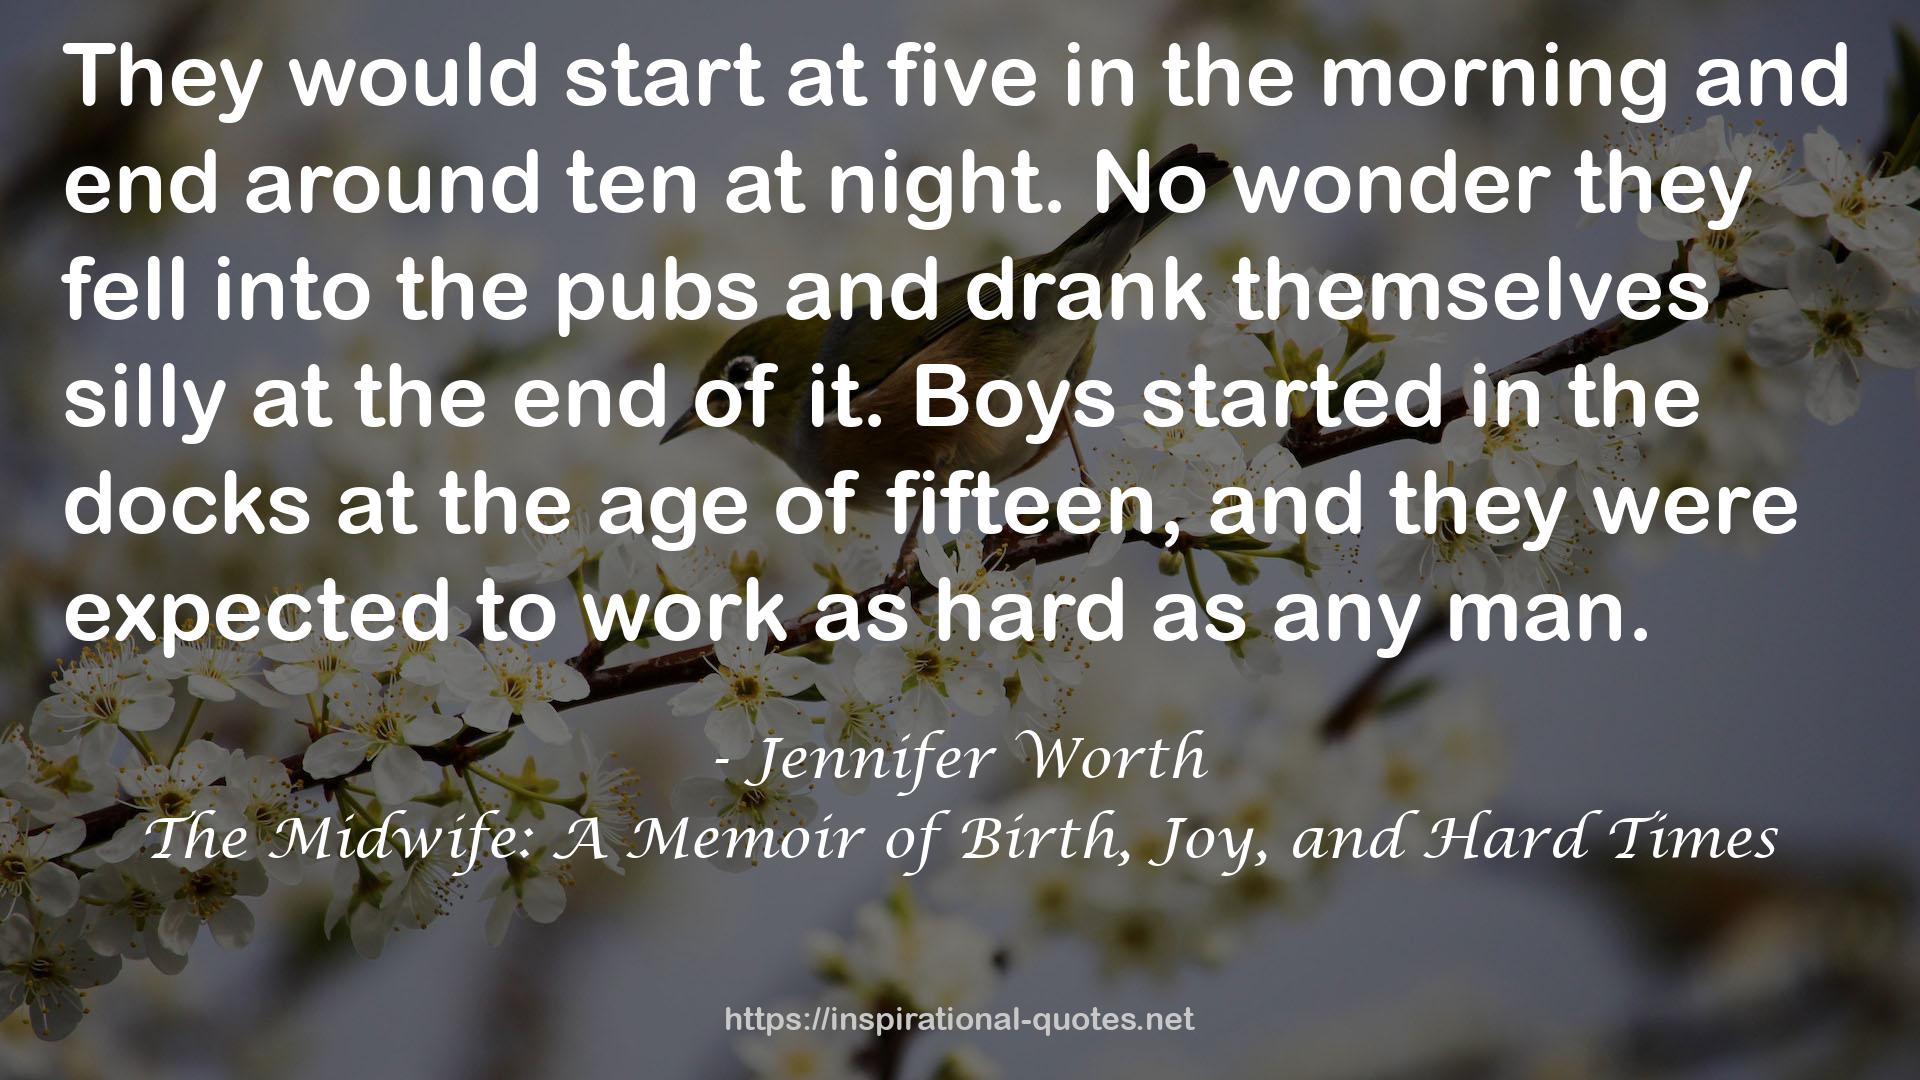 The Midwife: A Memoir of Birth, Joy, and Hard Times QUOTES